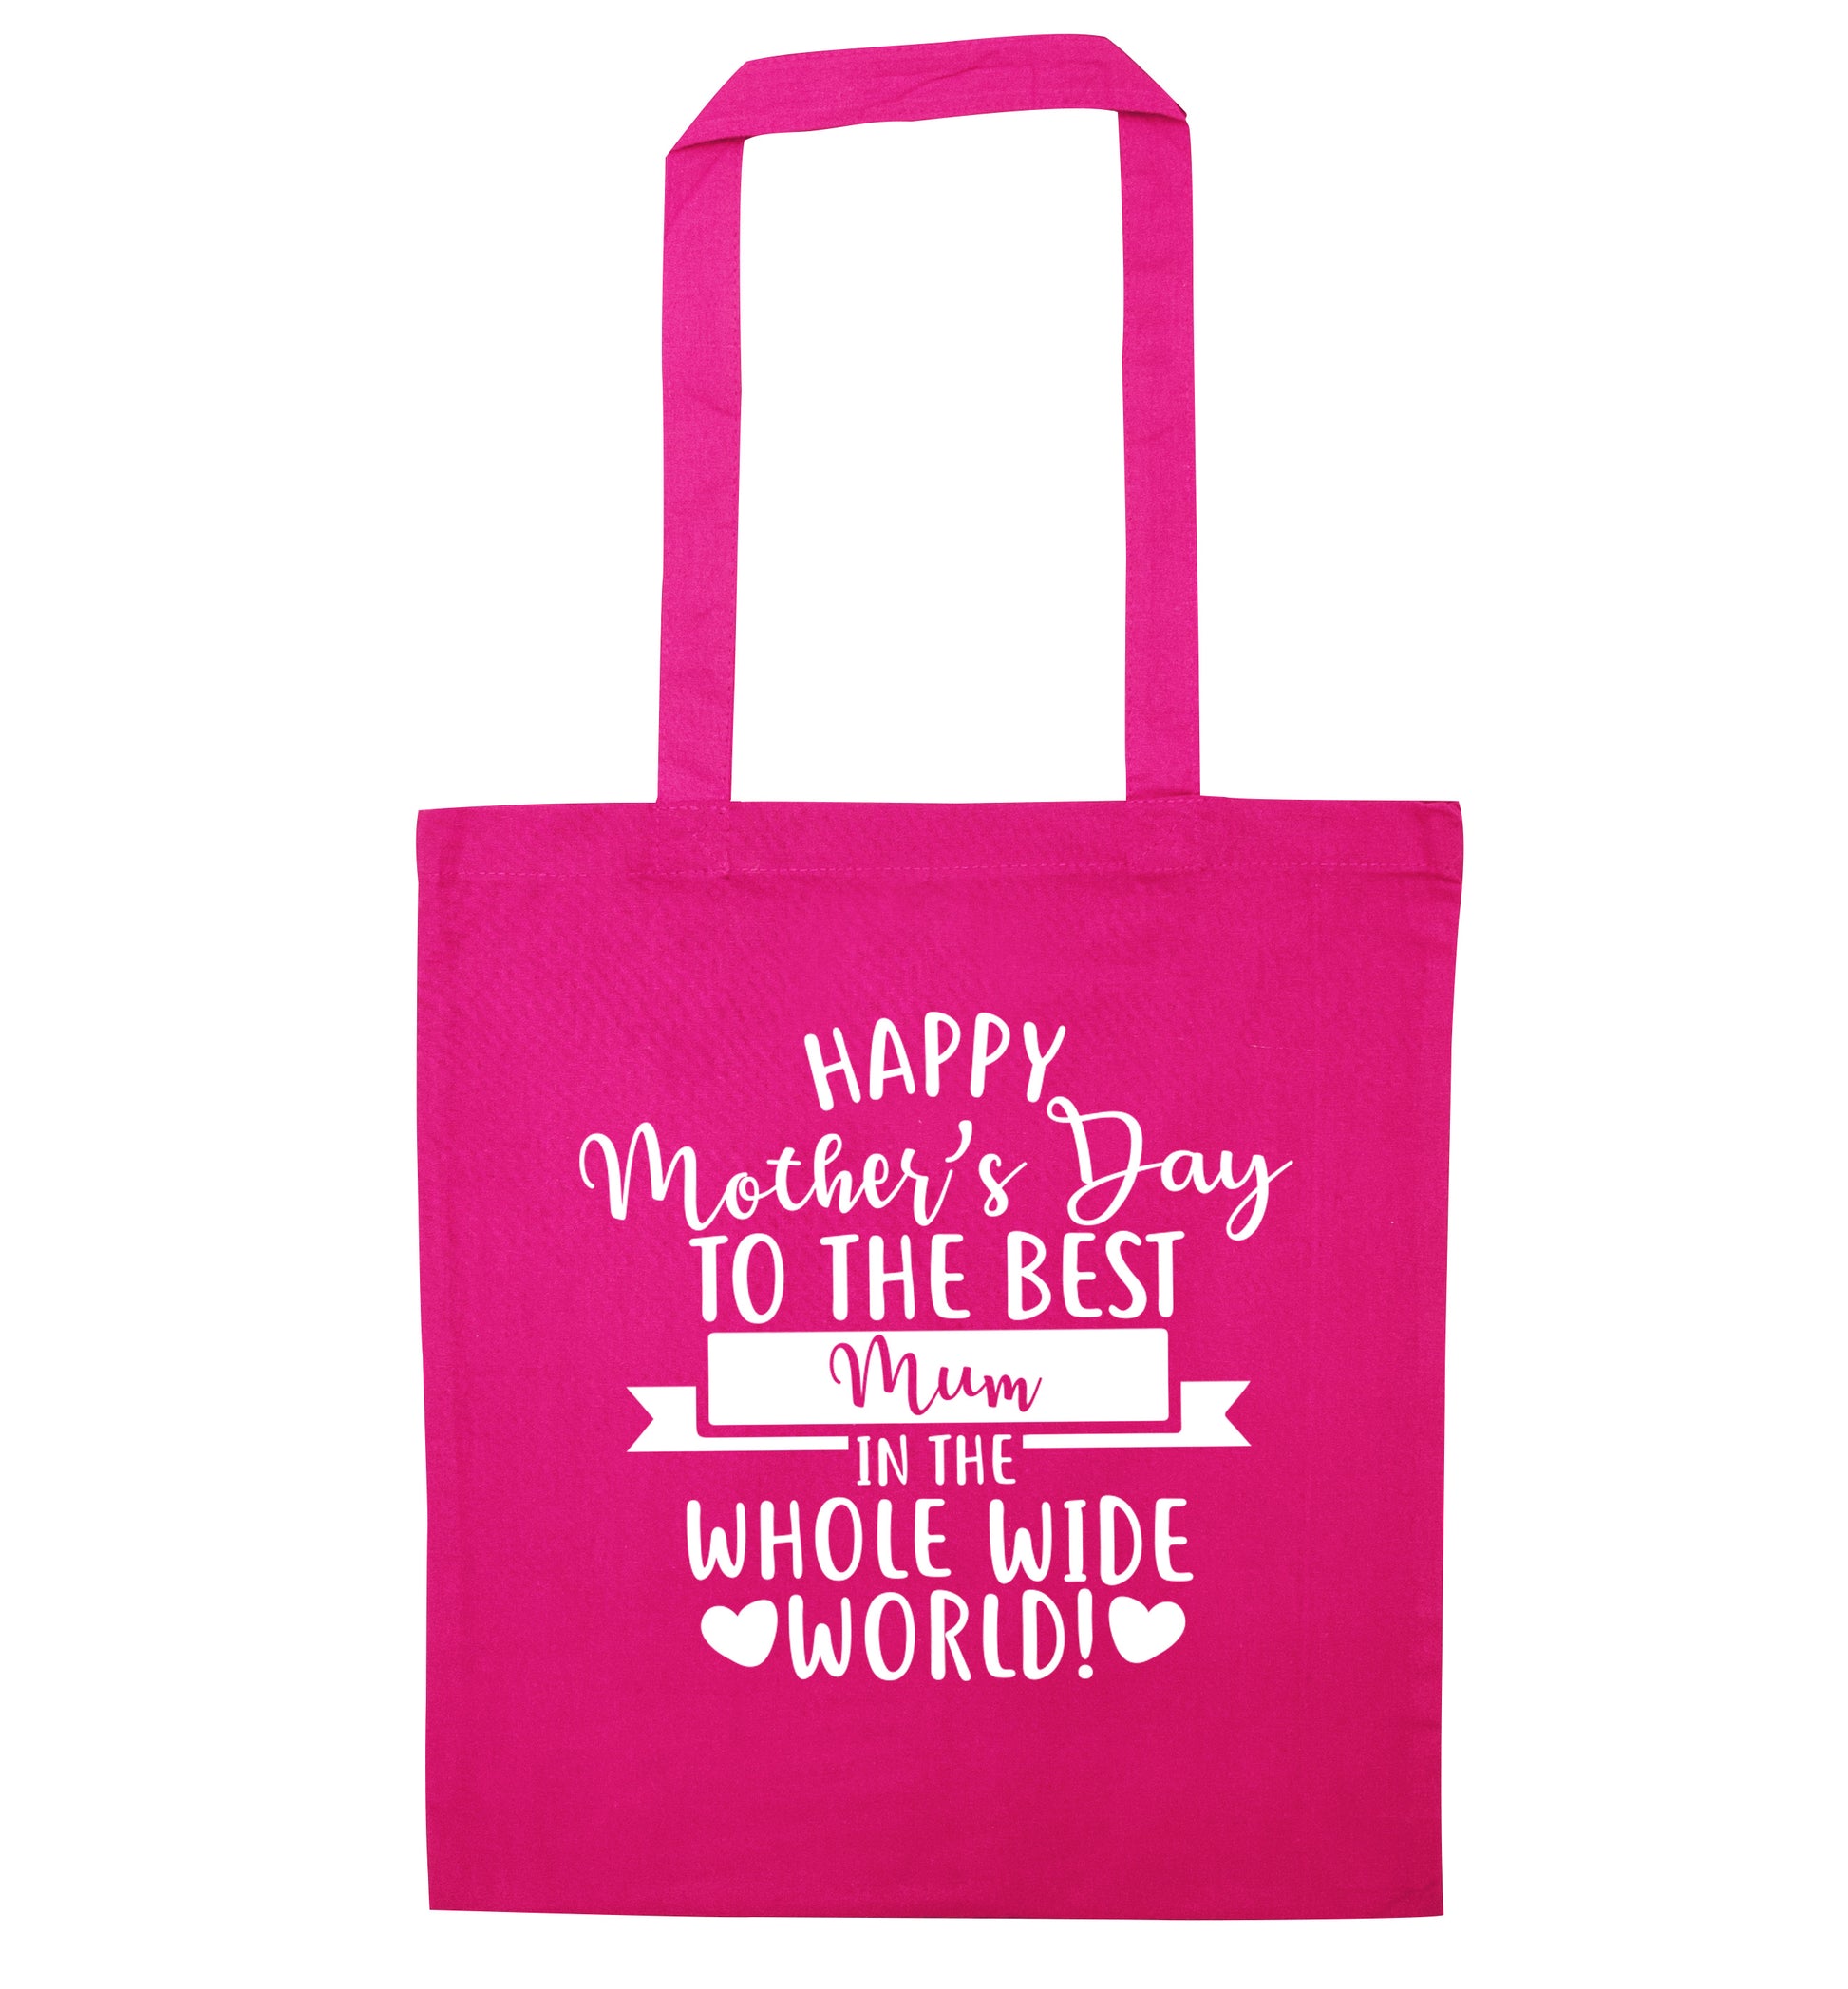 Happy Mother's Day to the best mum in the whole wide world! pink tote bag